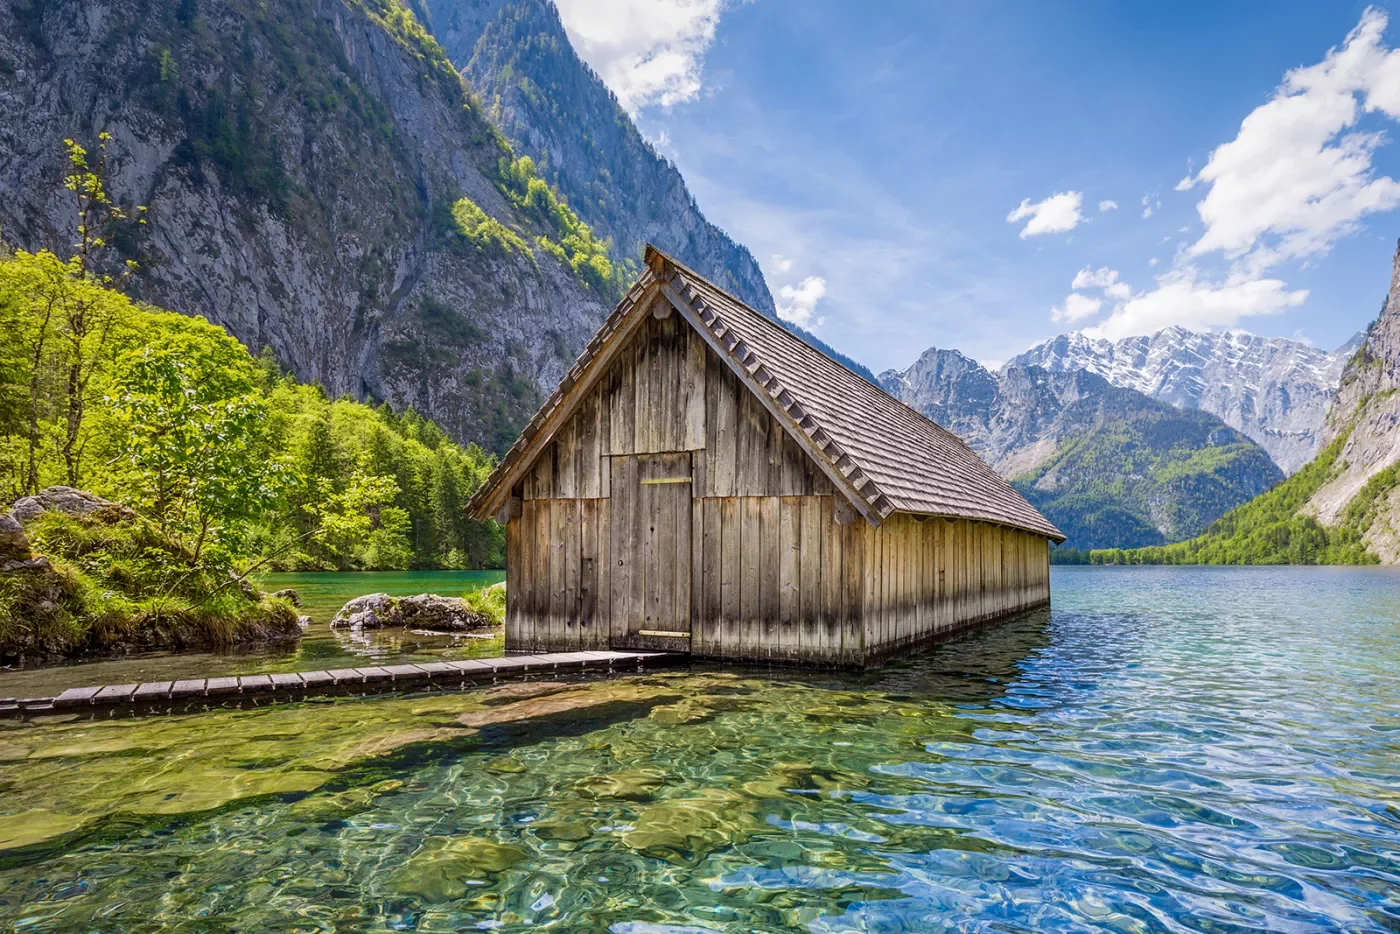 A wood house in a lake